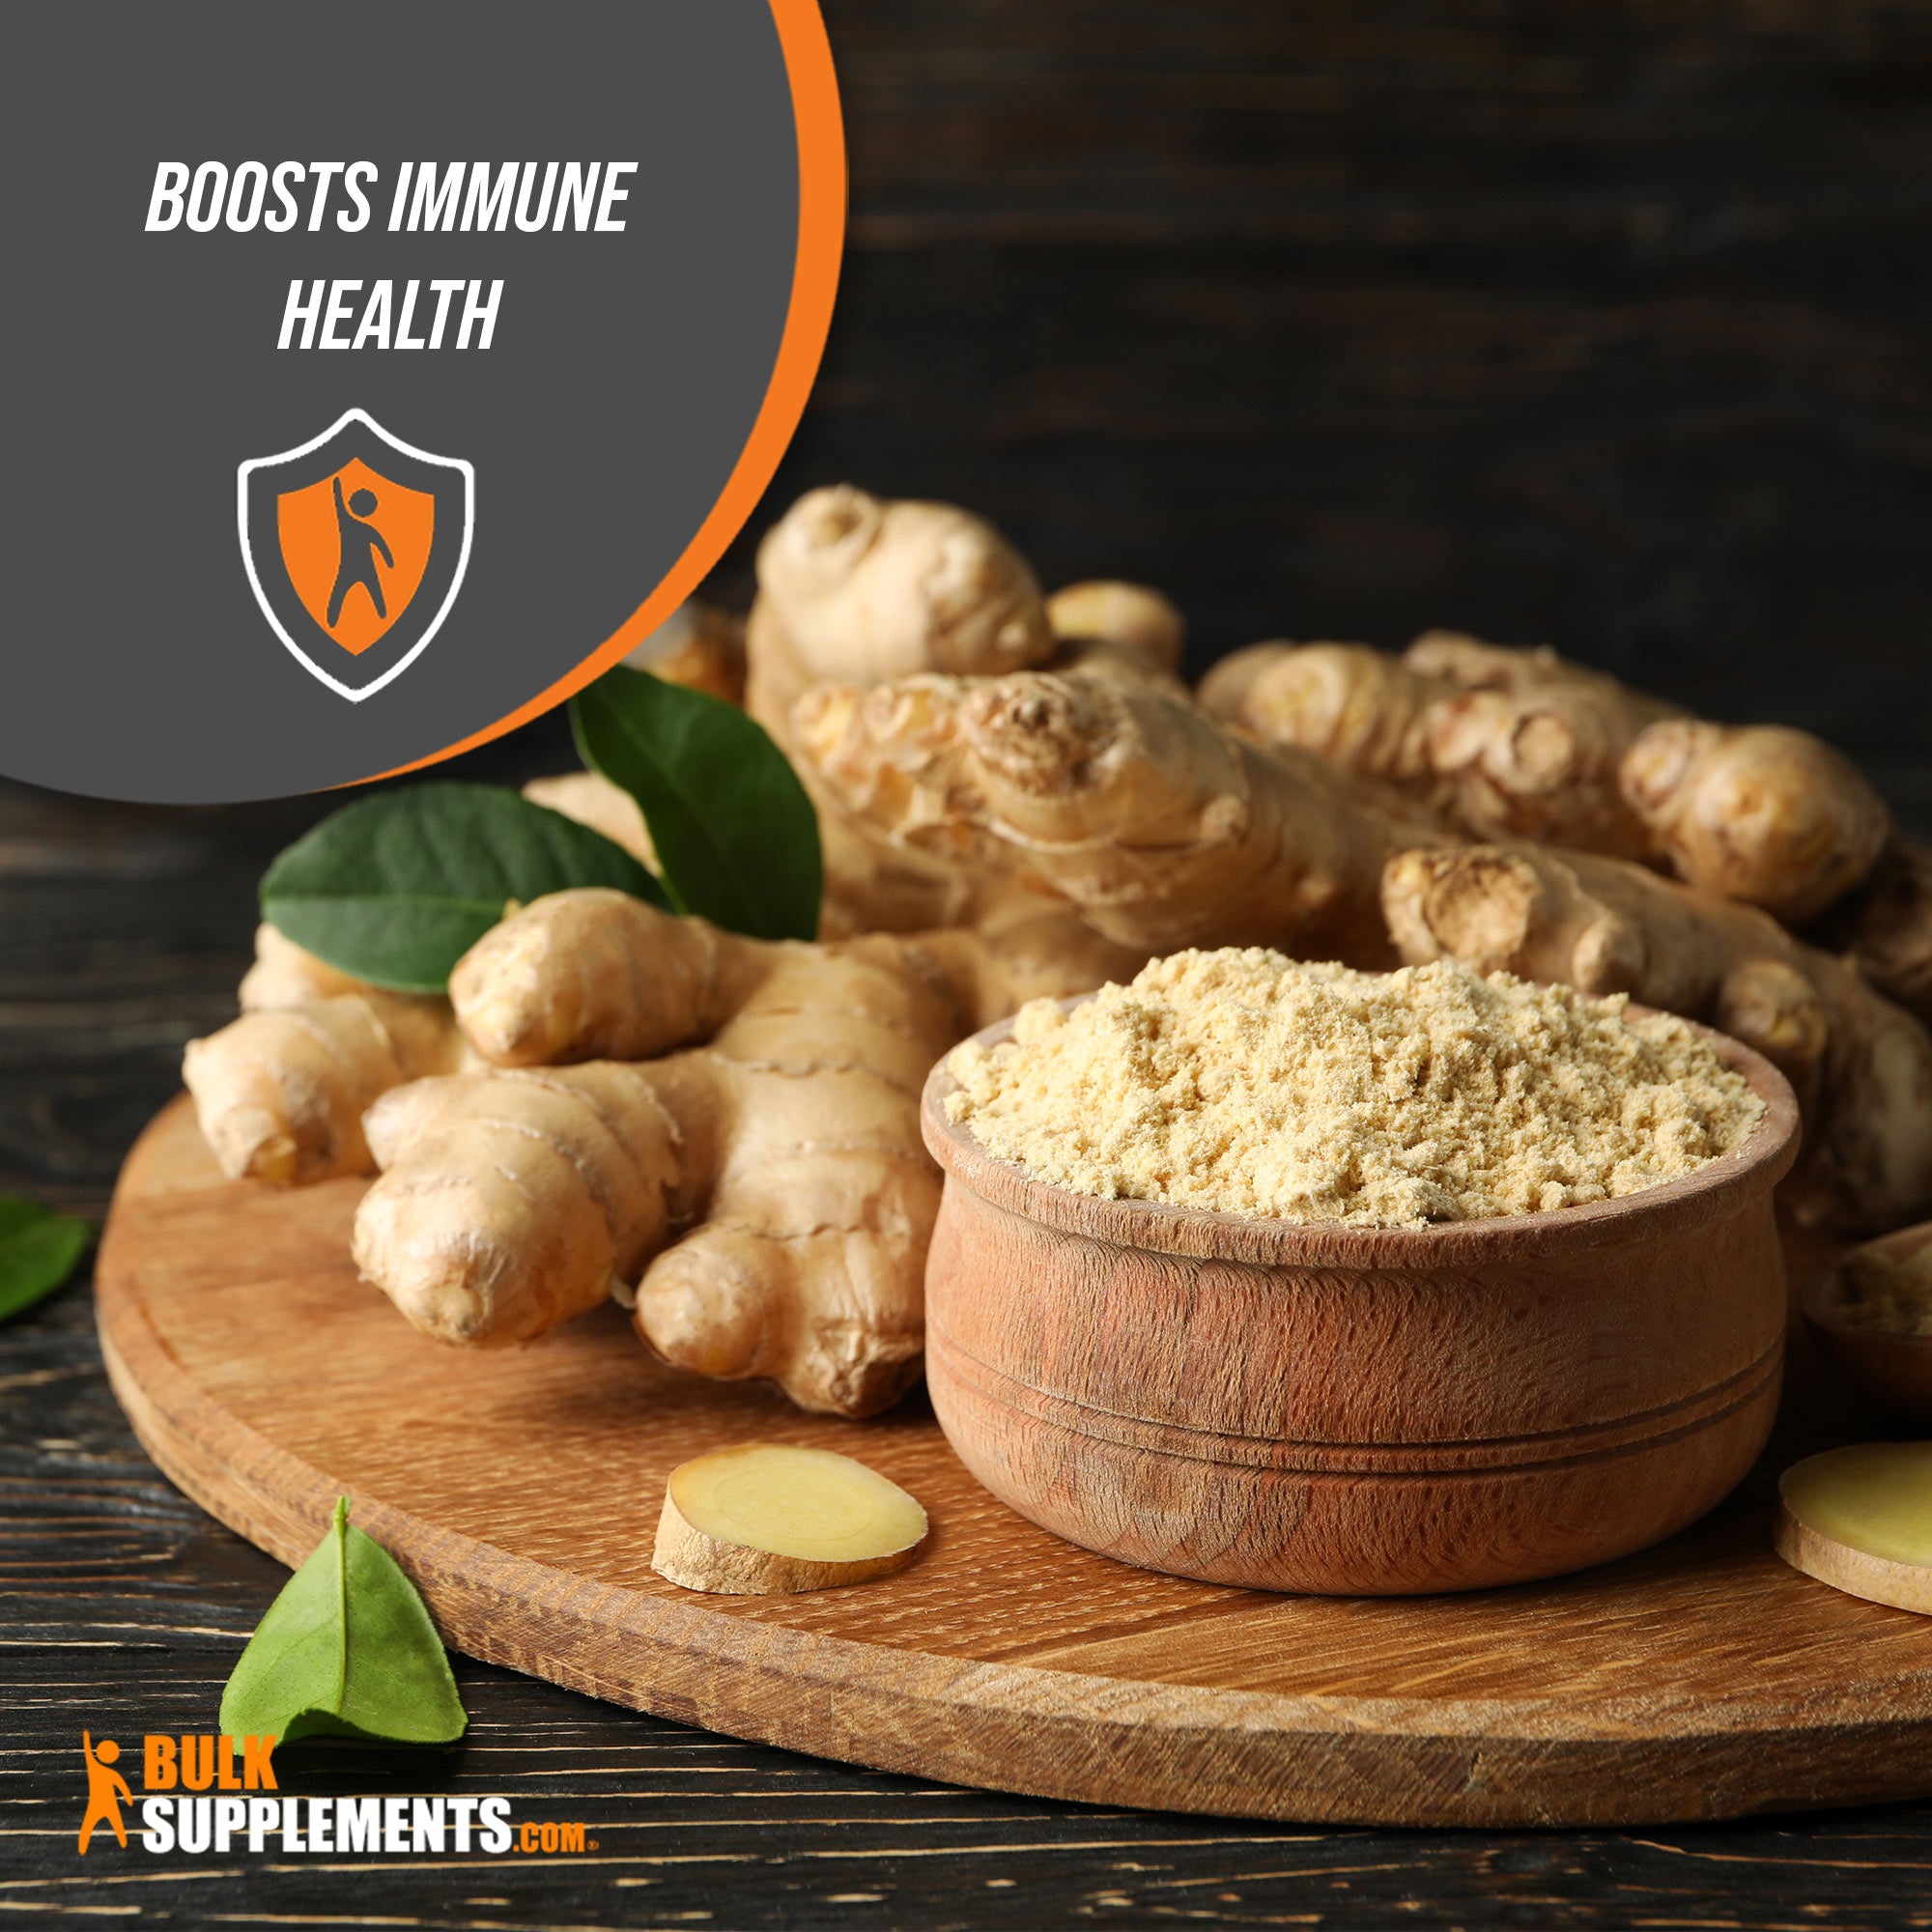 Ginger extract immune health supplement natural immunity boost